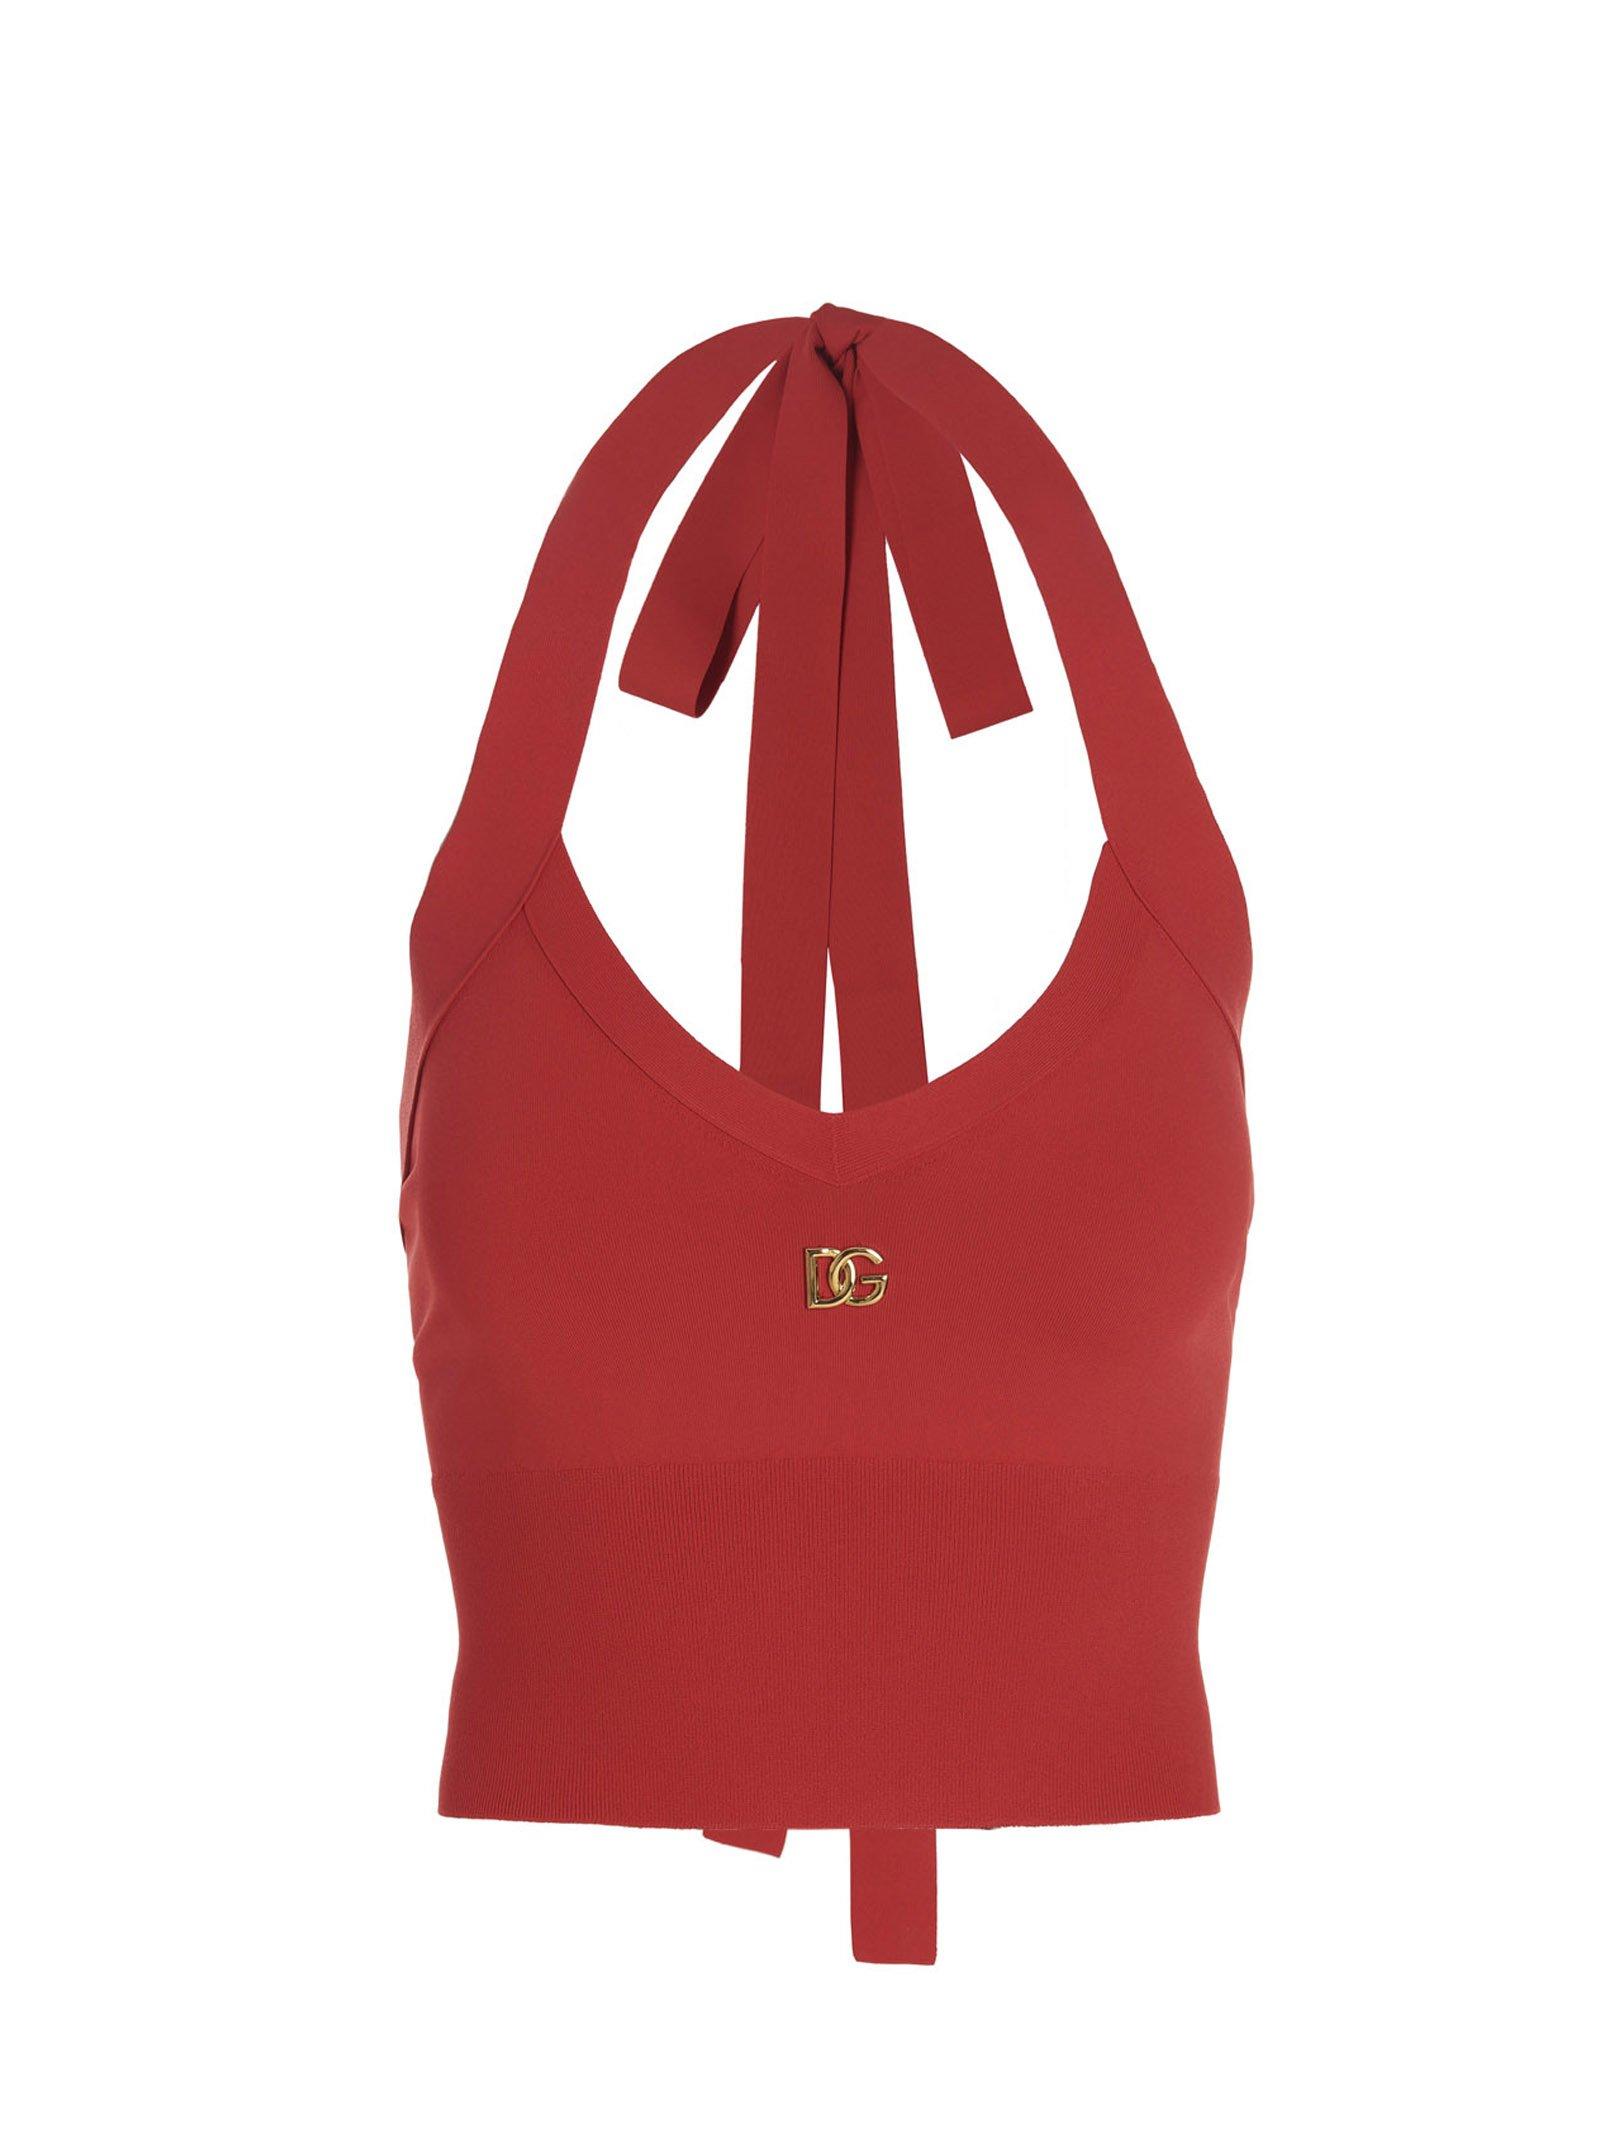 Dolce & Gabbana Logo Plaque V-neck Cropped Top in Red | Lyst